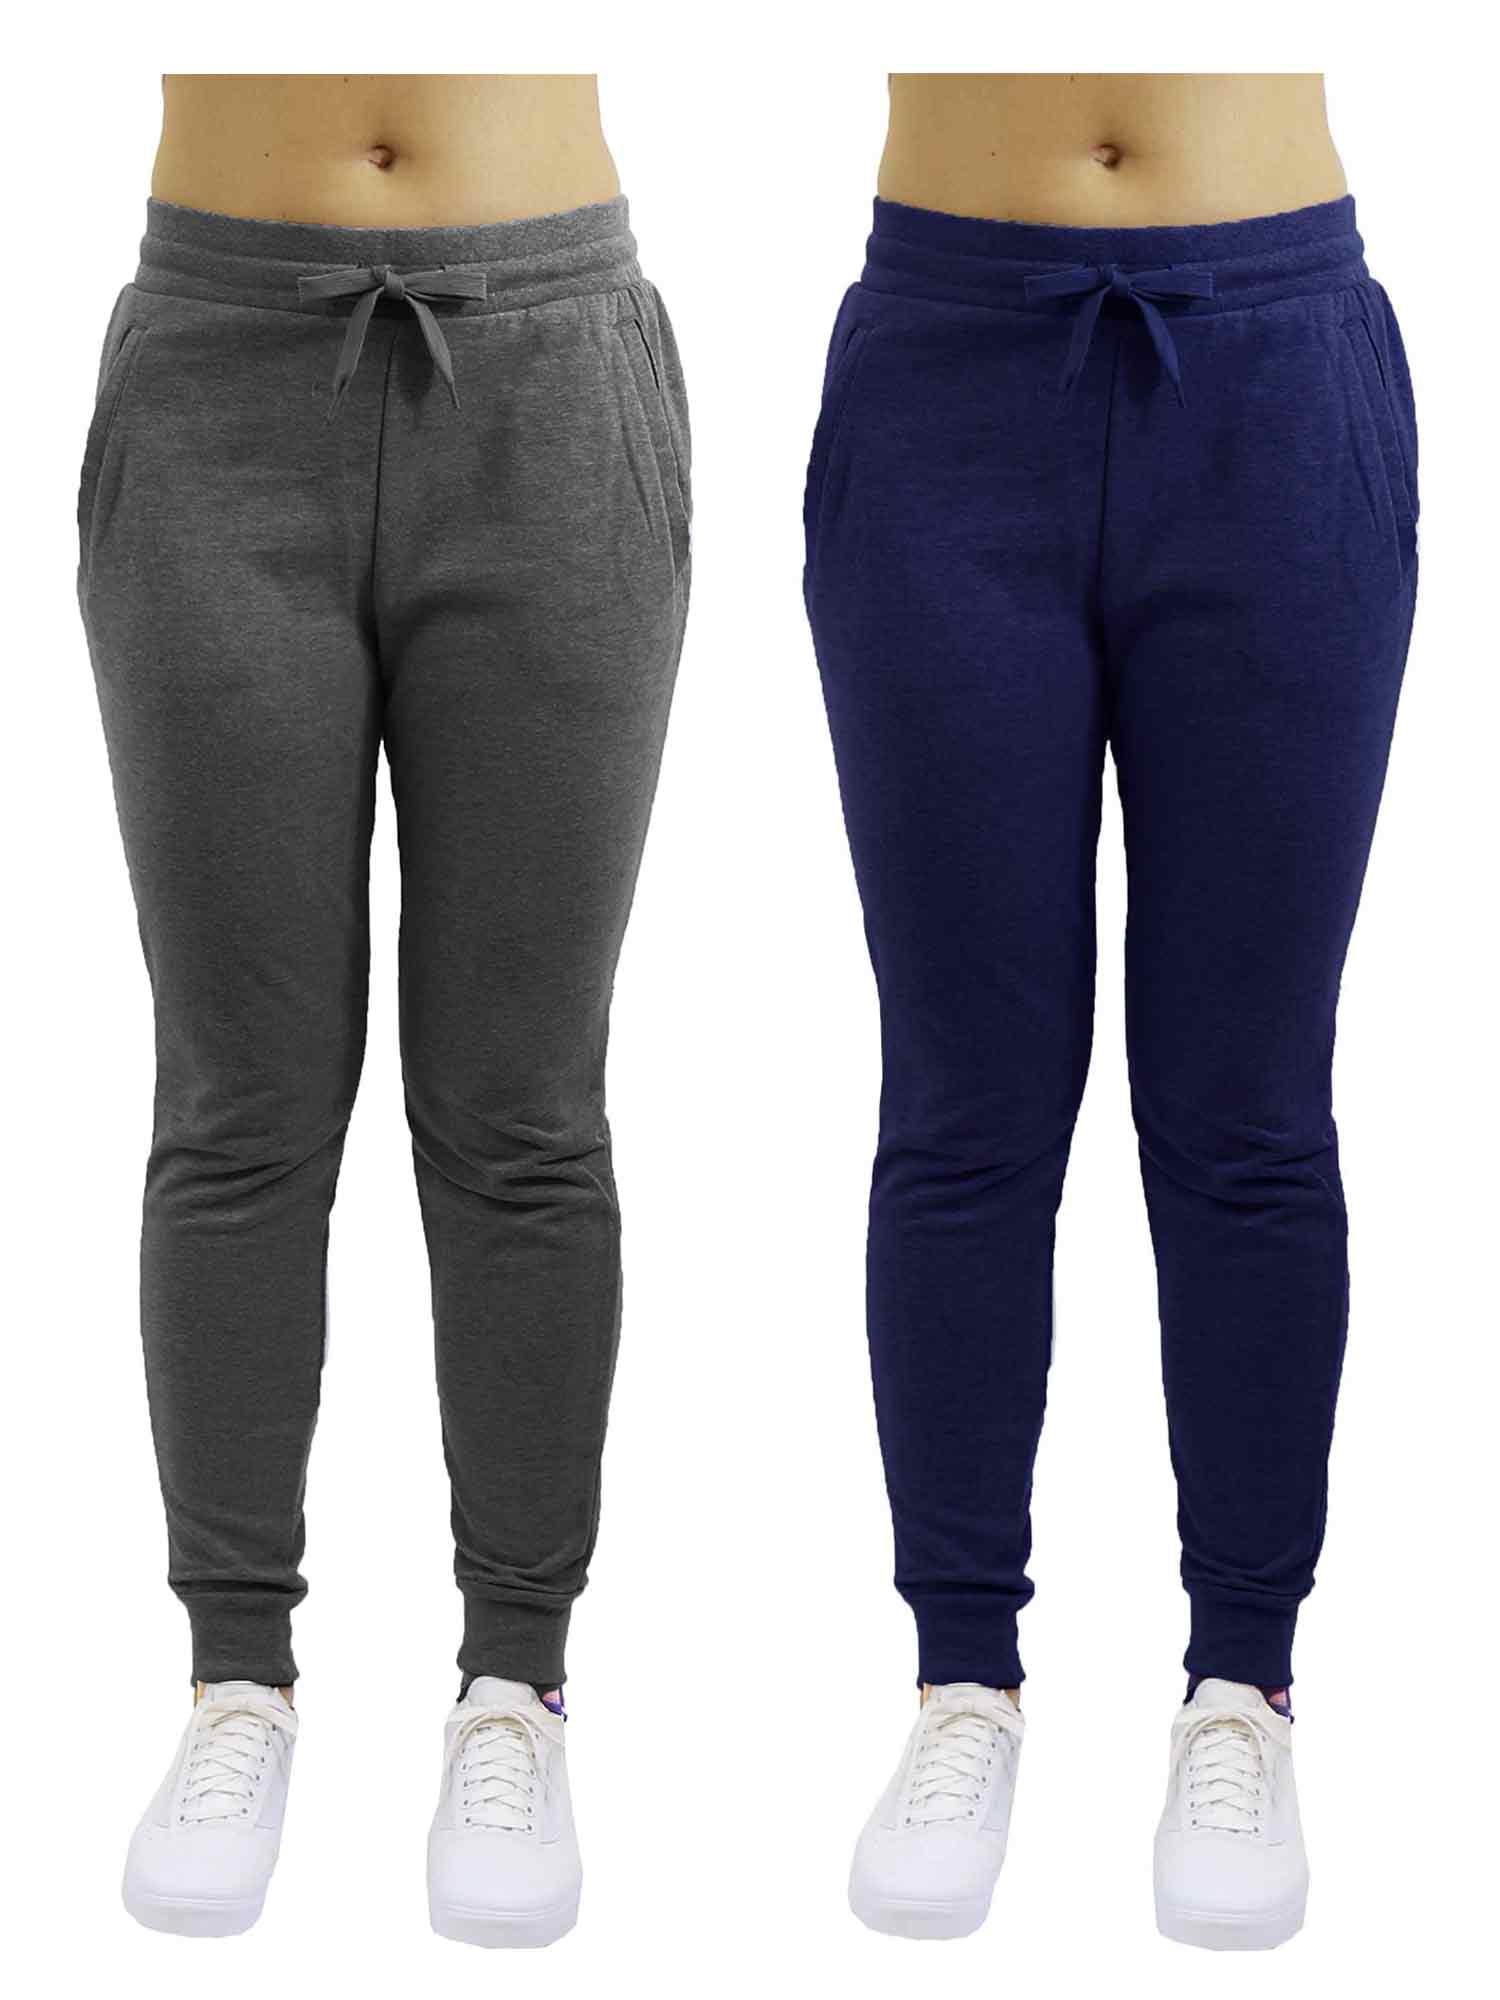 Real Love Girls’ Sweatpants 2 Pack Basic Active Fleece Joggers Size: 7-16 